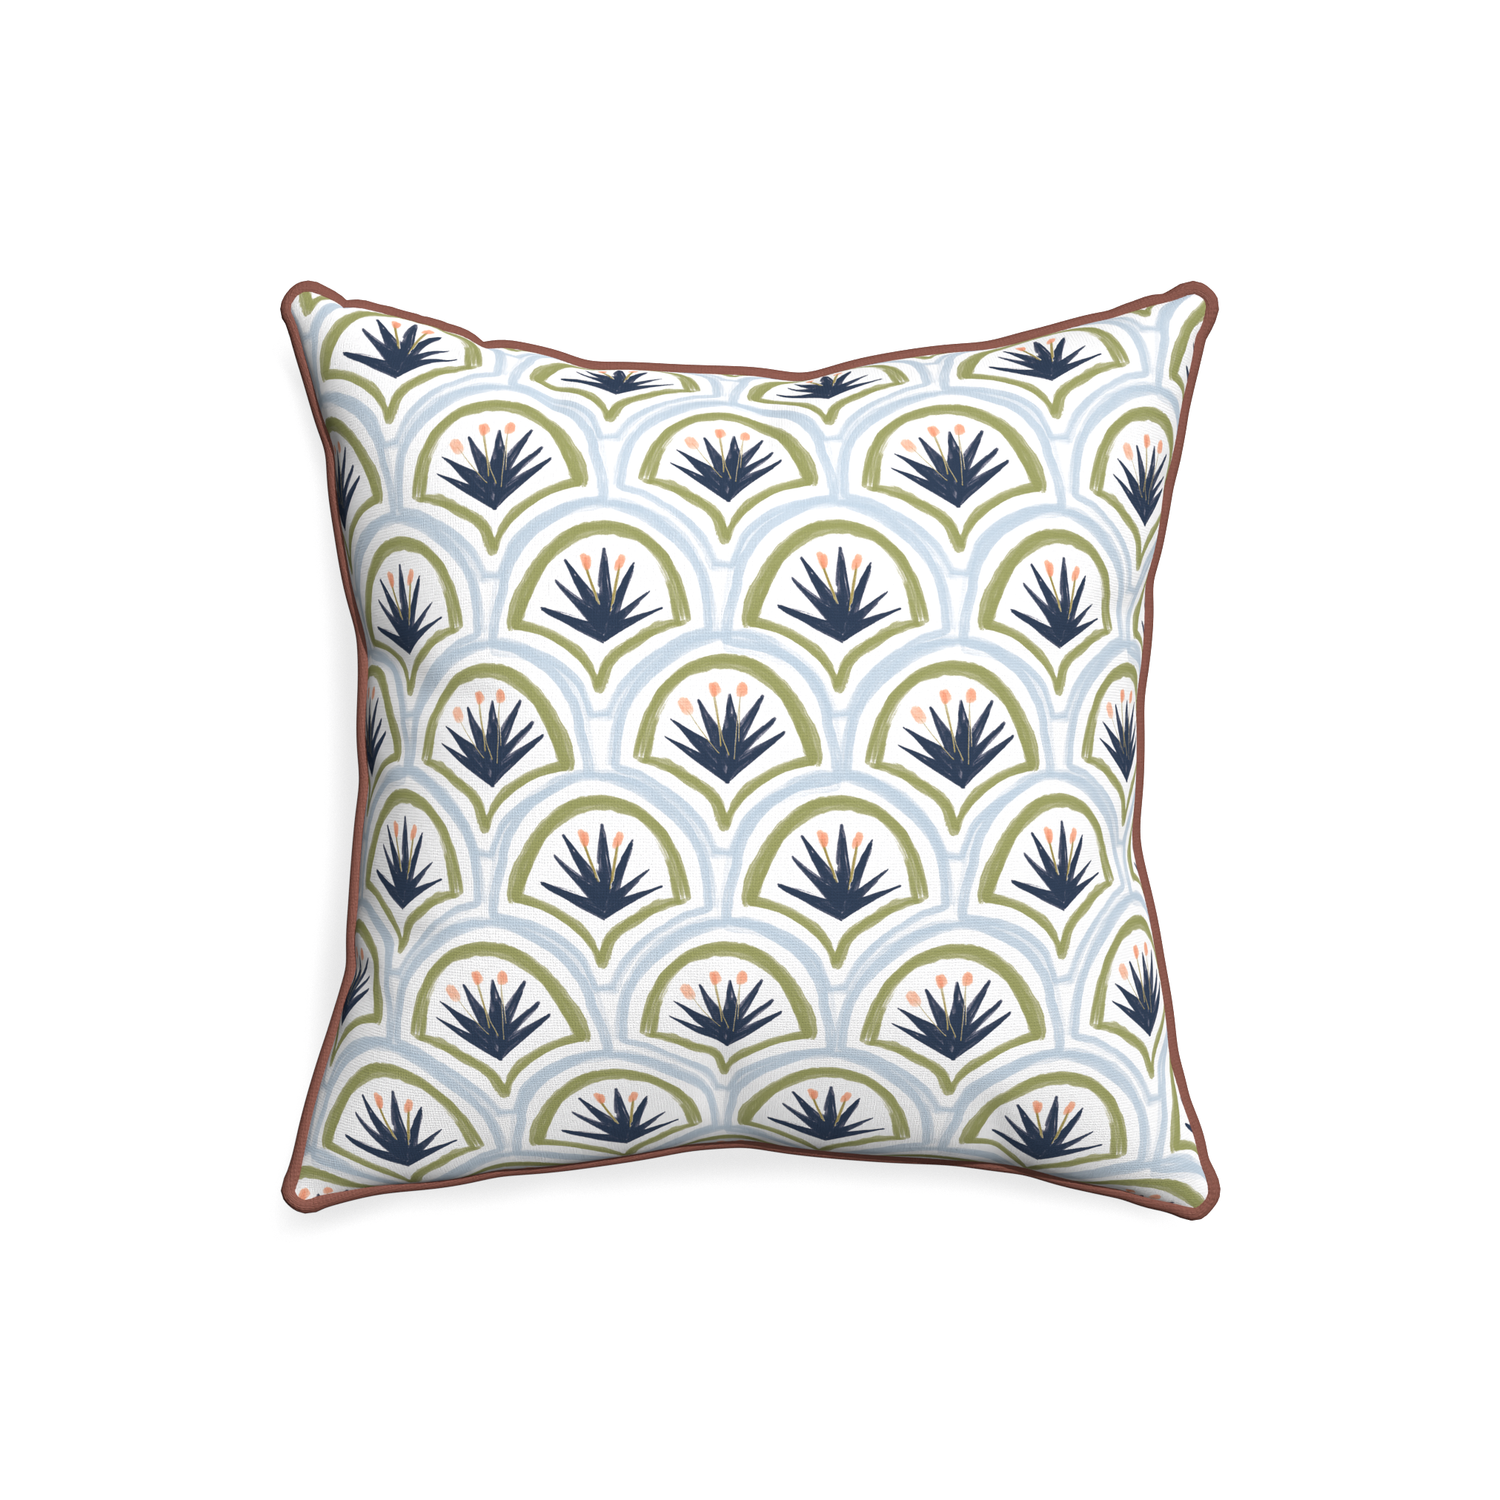 20-square thatcher midnight custom art deco palm patternpillow with w piping on white background